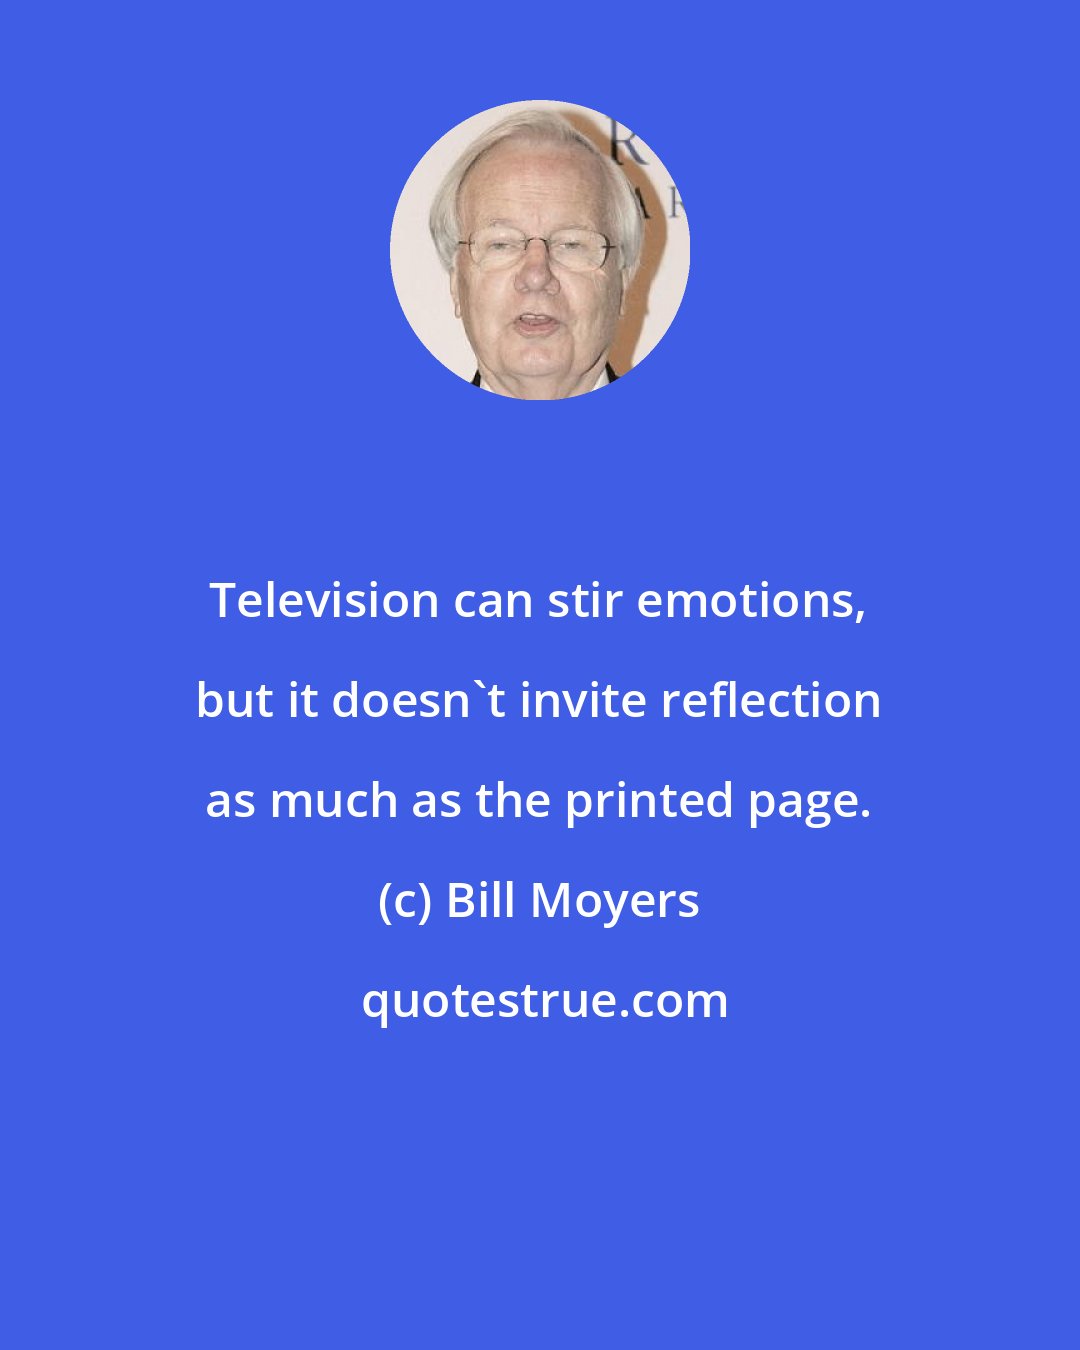 Bill Moyers: Television can stir emotions, but it doesn't invite reflection as much as the printed page.